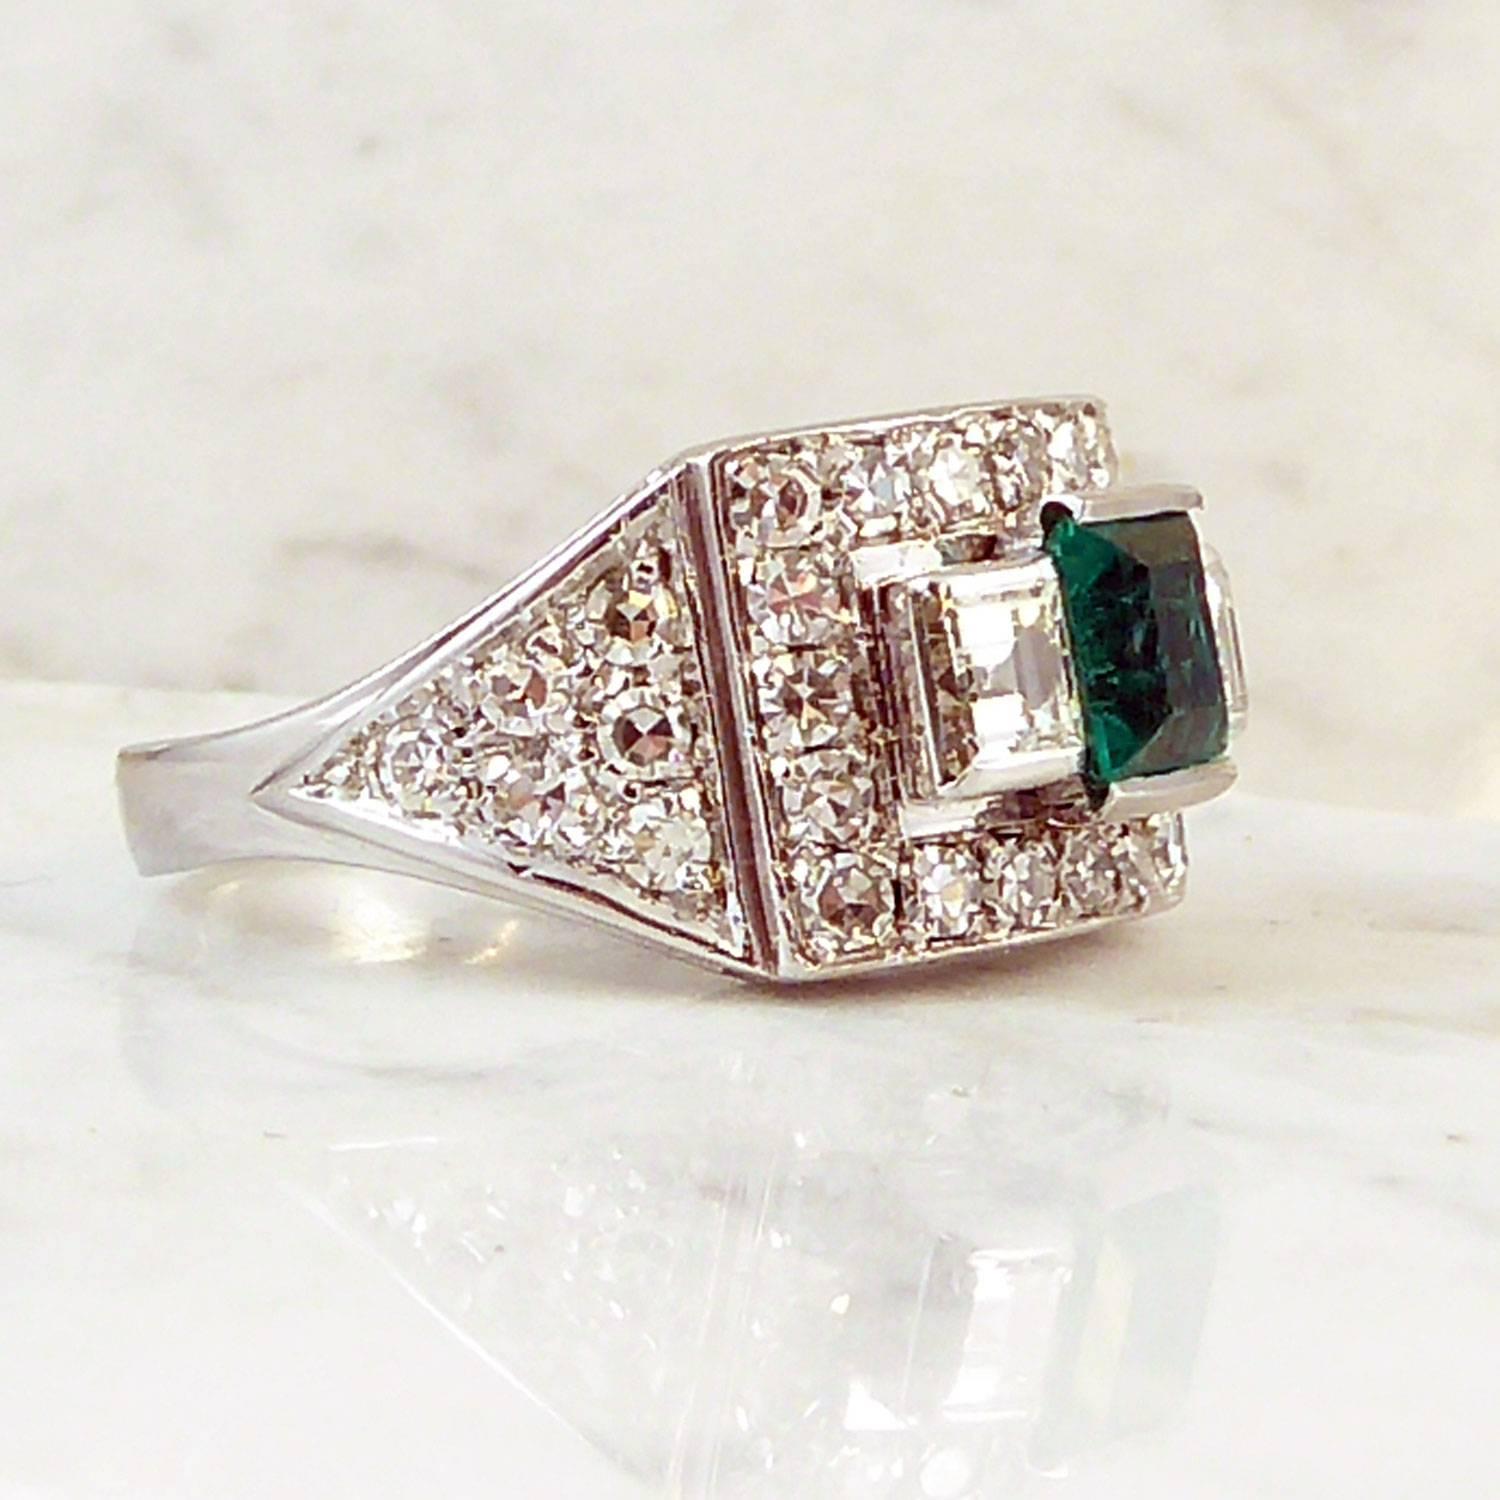 Emerald Cut 0.65 Carat Emerald and Diamond Ring, Geometric Cluster, French